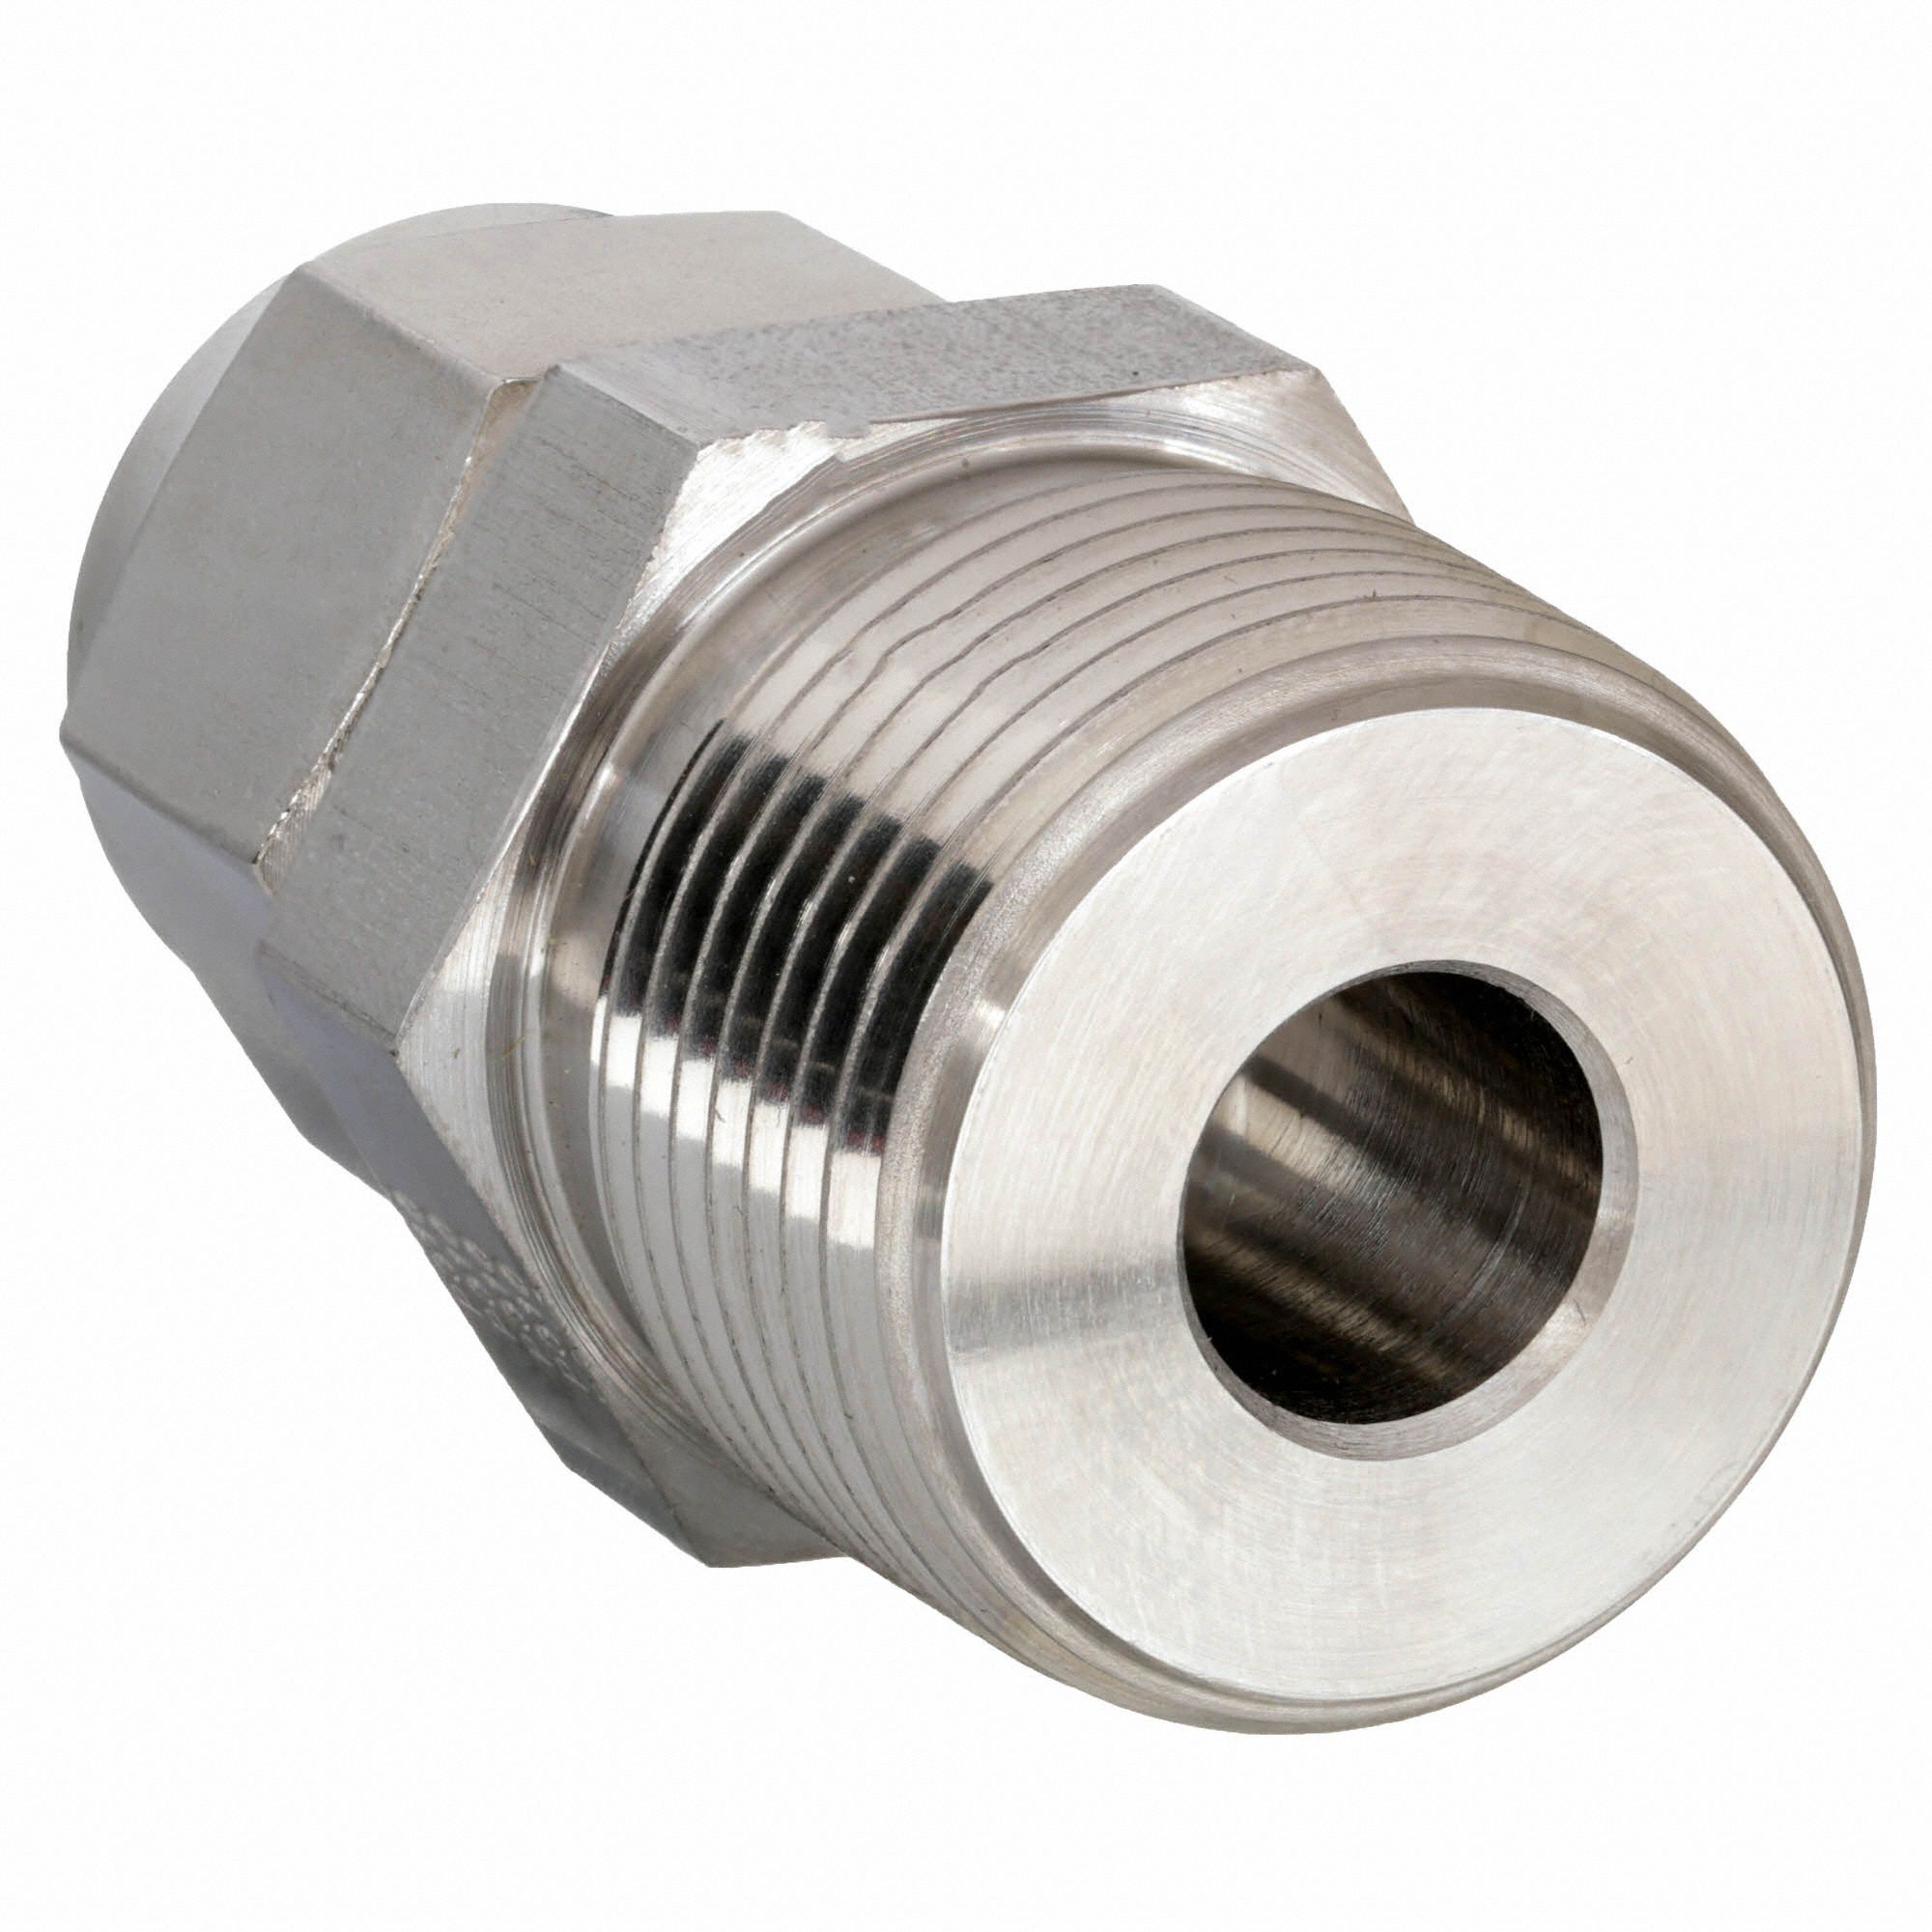 NEW -8 Male JIC x 1/2" Male NPT Straight Adapter 316 Stainless Steel 